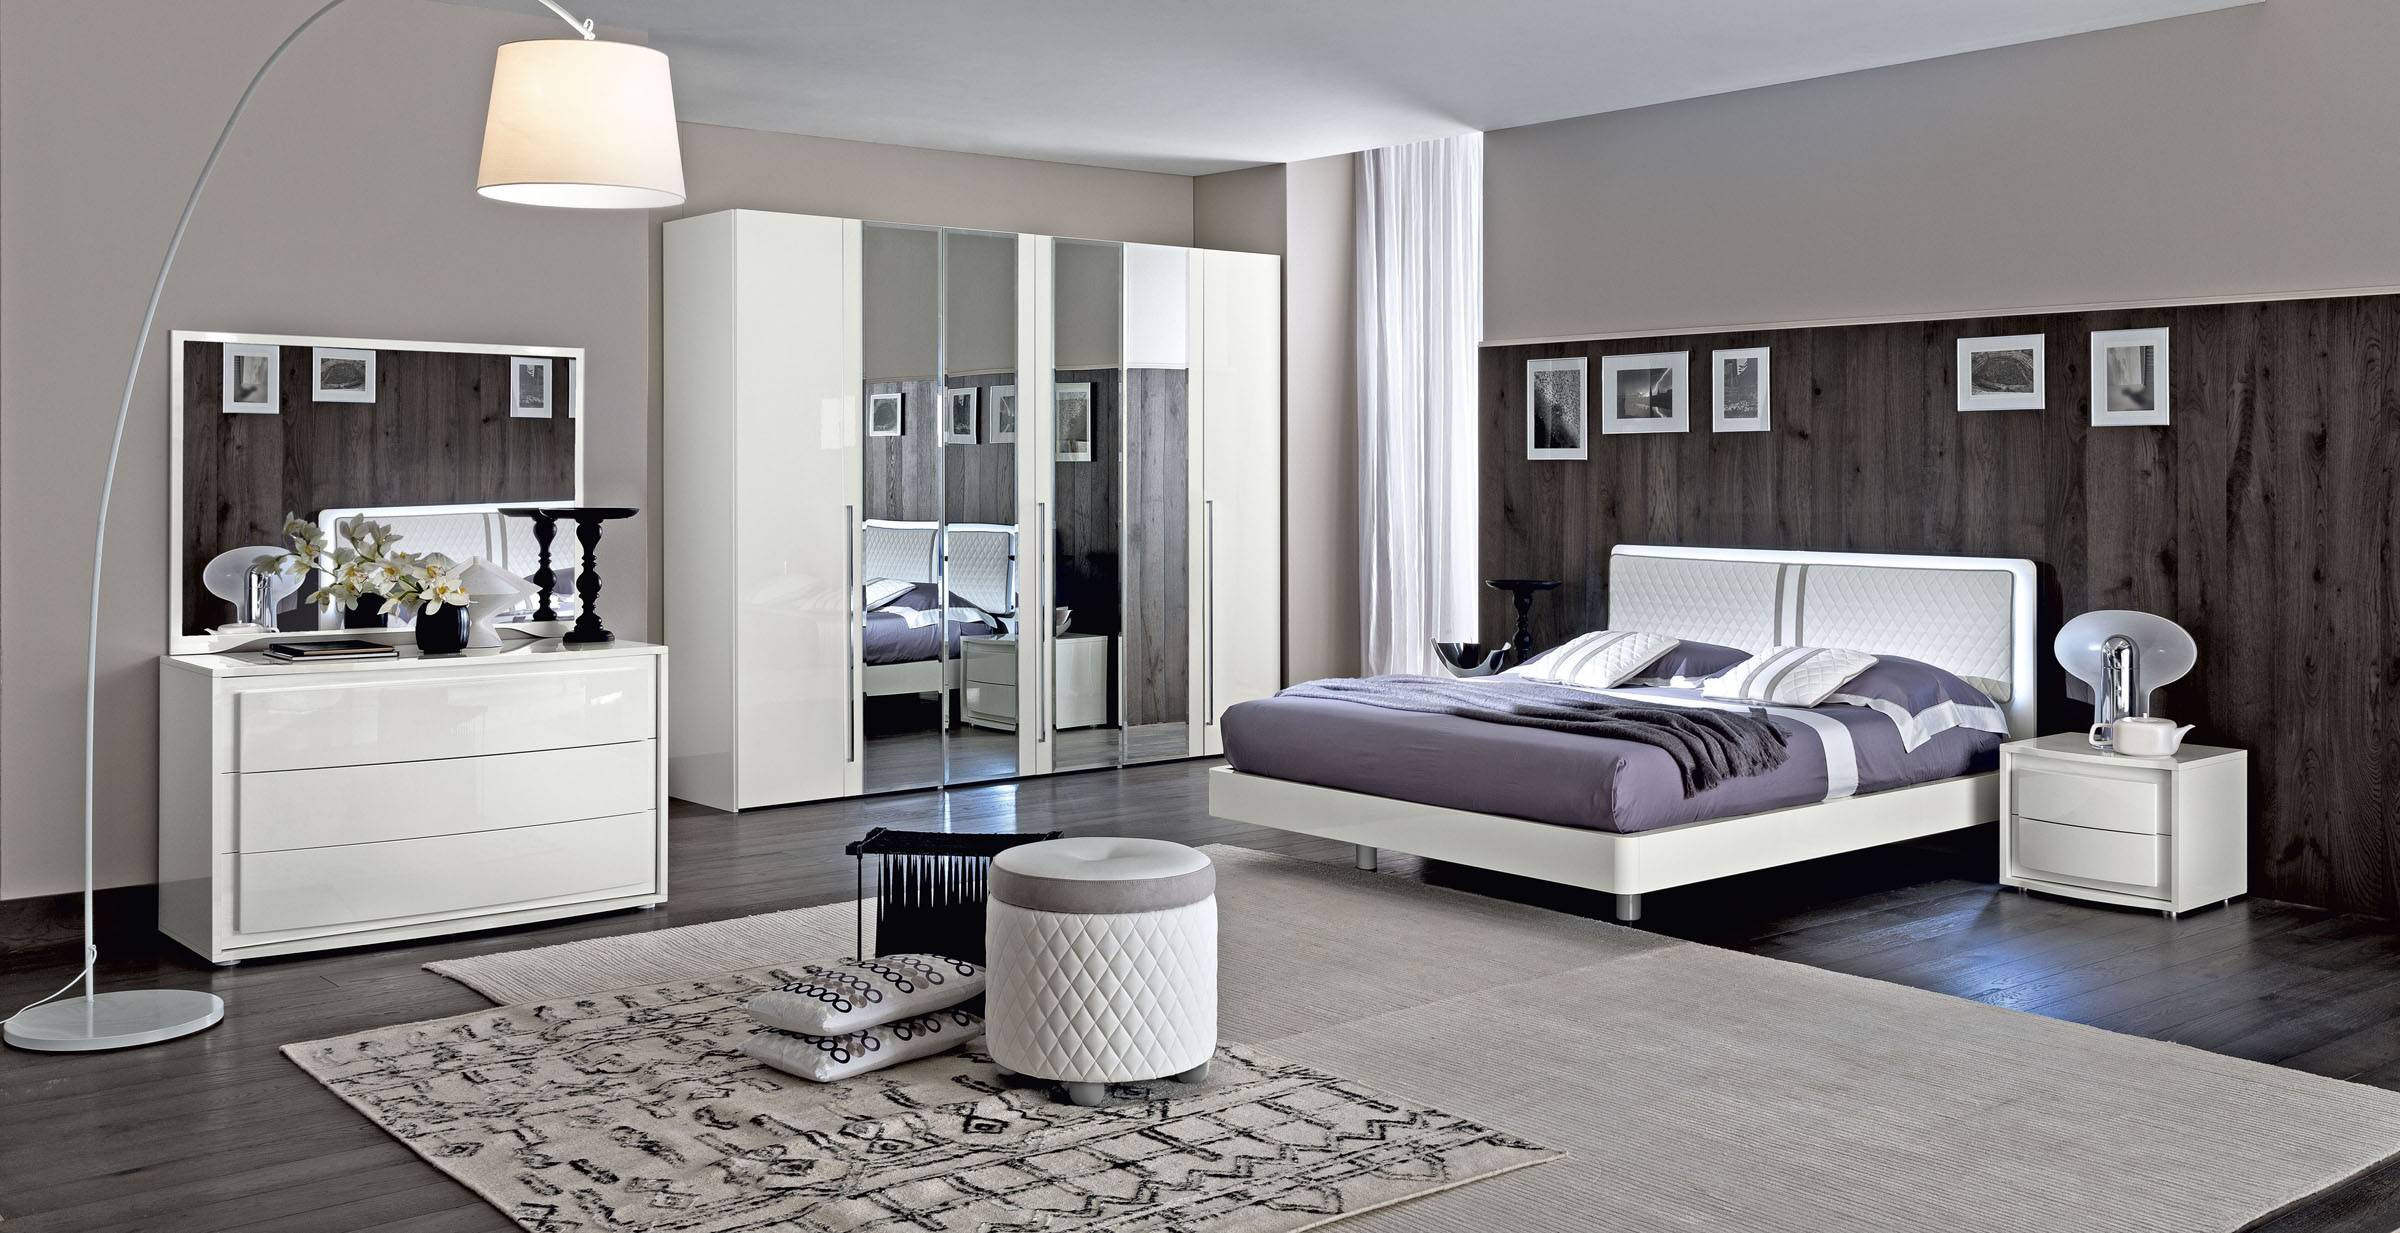 Bedroom Set Modern
 Made in Italy Wood Modern Contemporary Master Beds Tempe